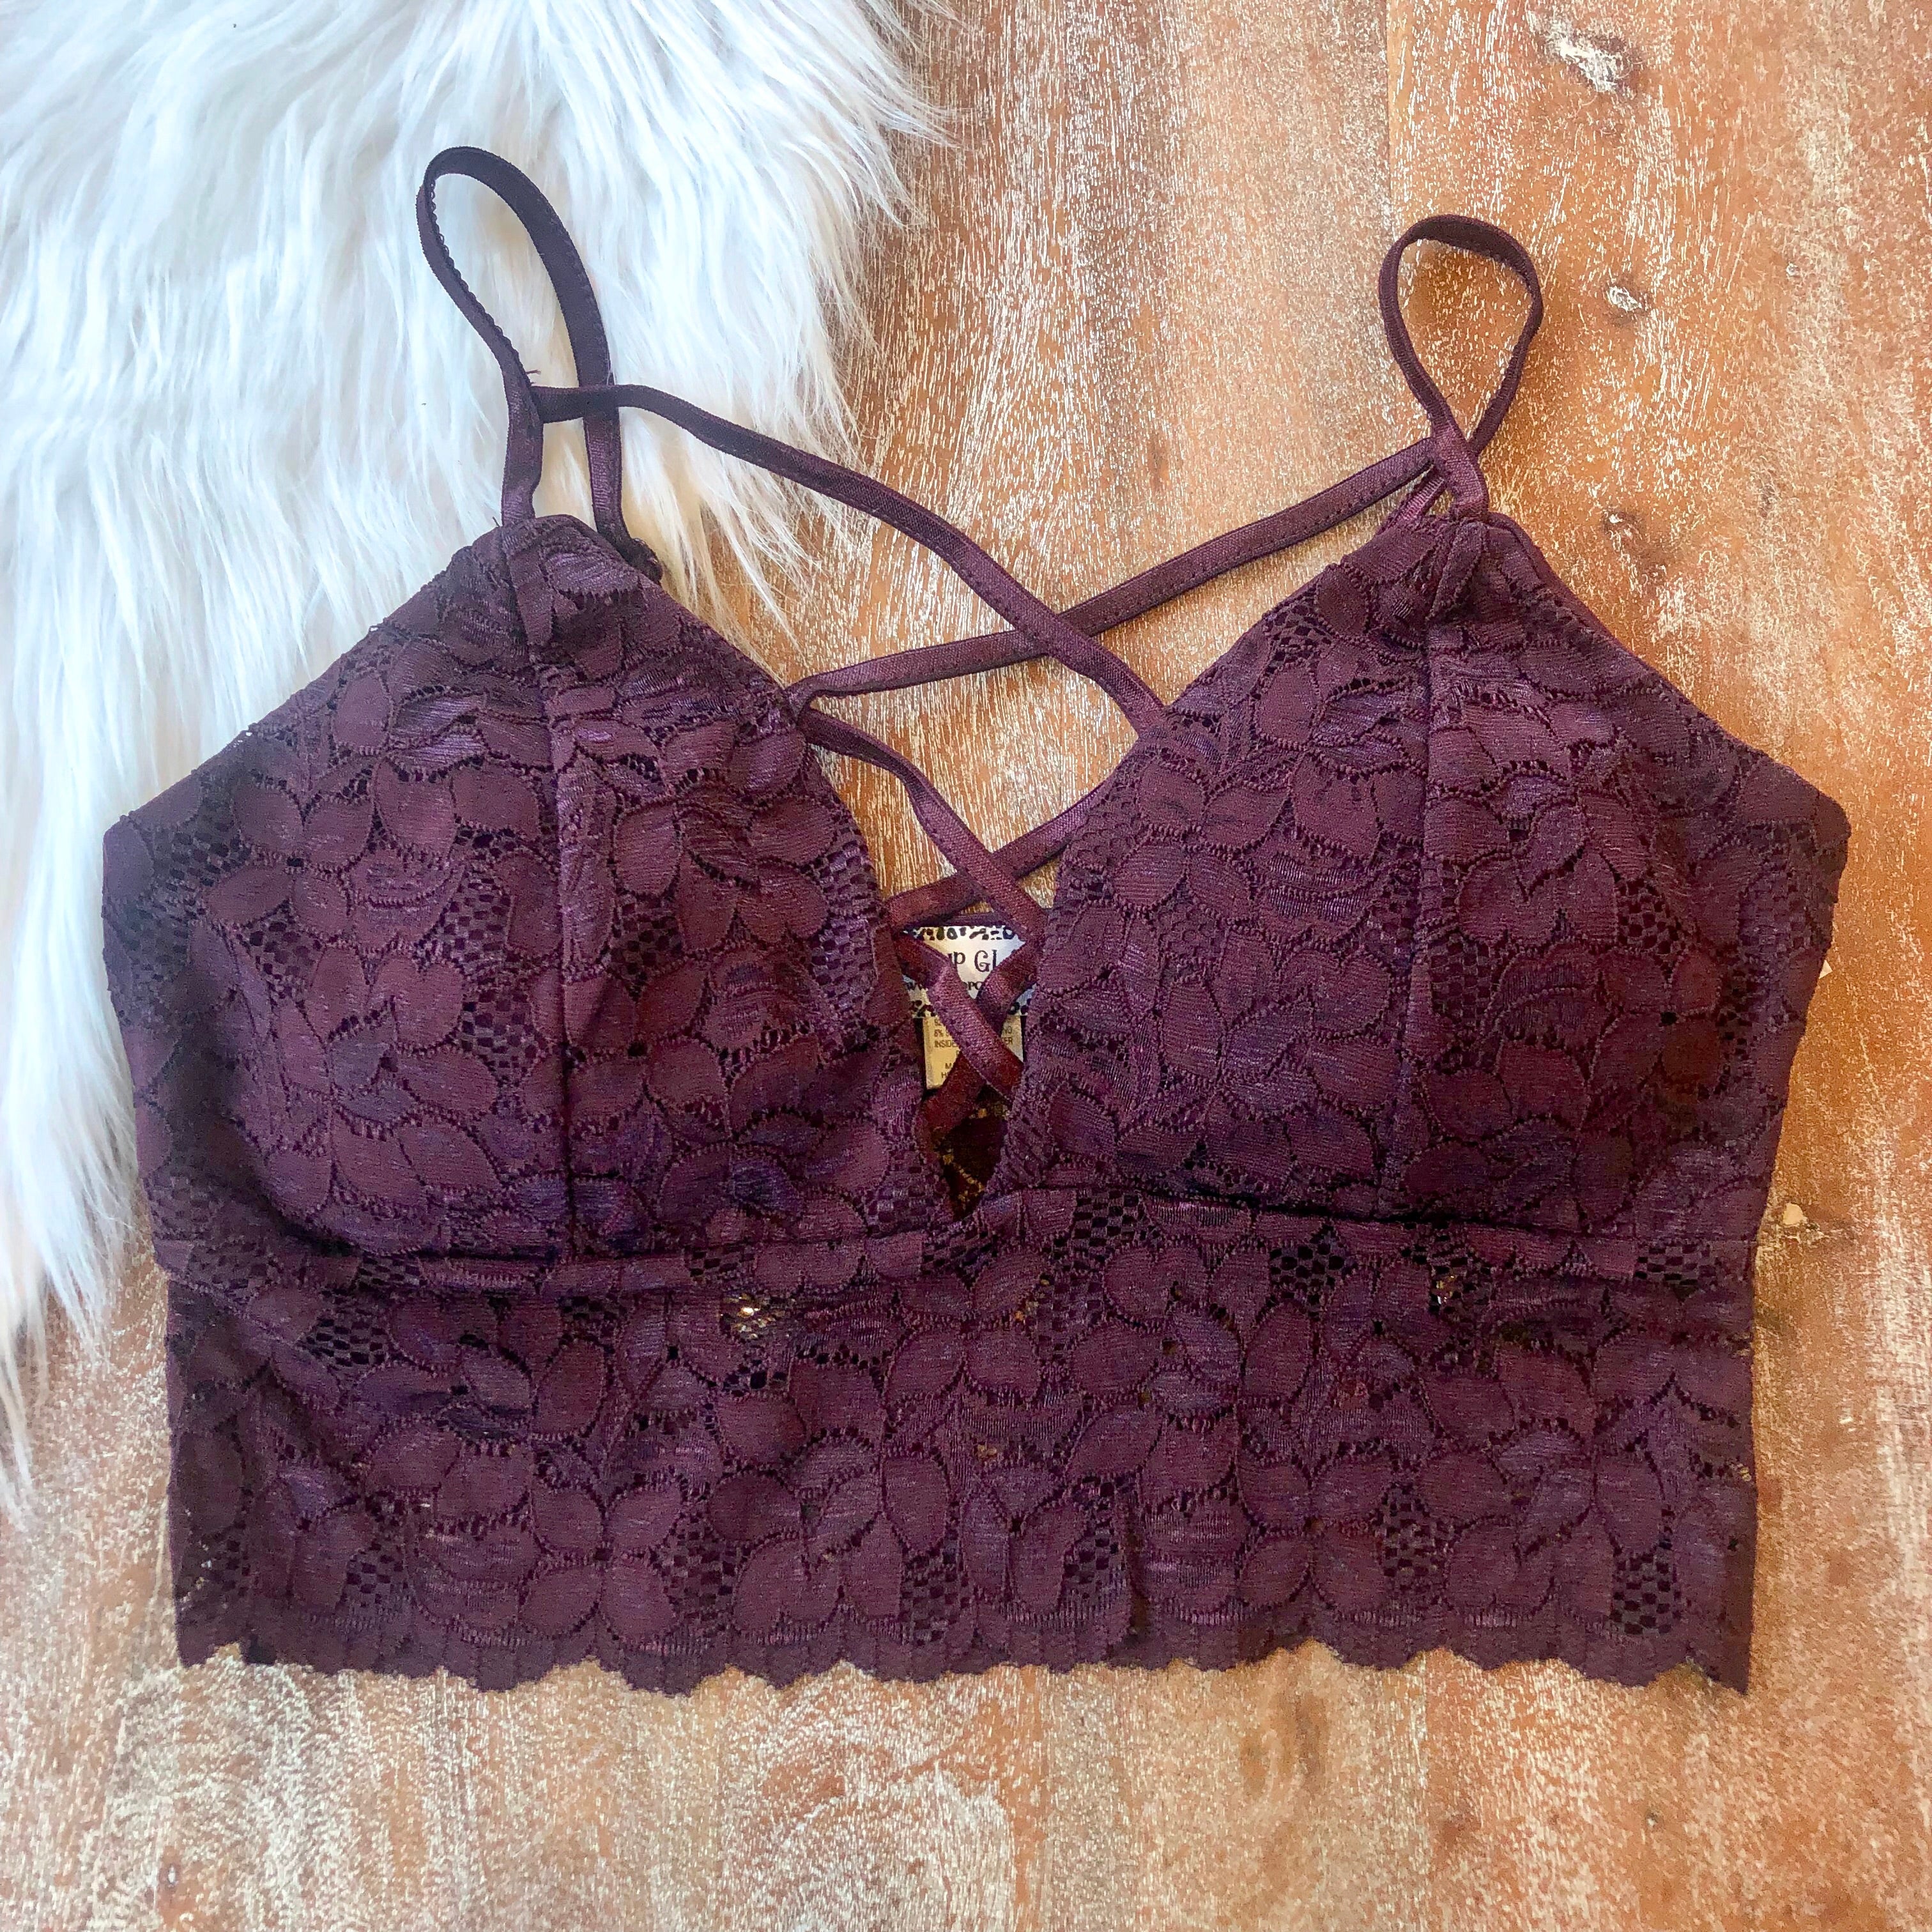 Ignore the Rules Strappy Lace Bralette in Maroon - Giddy Up Glamour Boutique